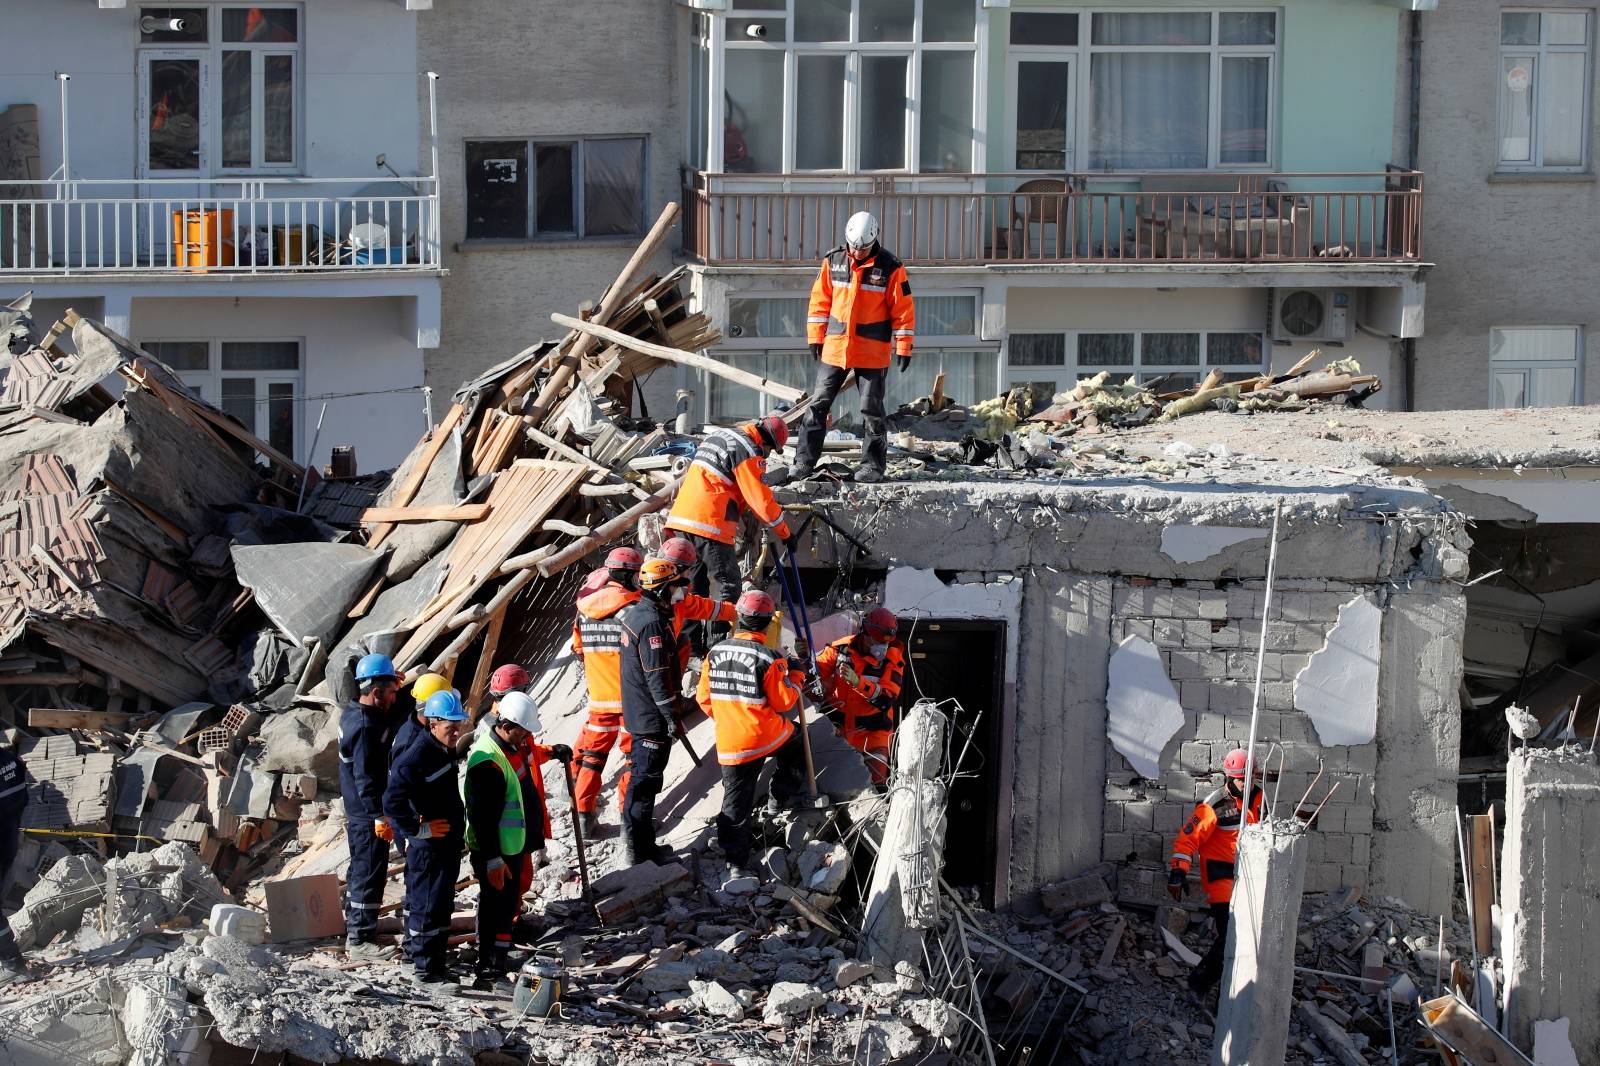 Rescue workers search the site of a collapsed building, after an earthquake in Elazig